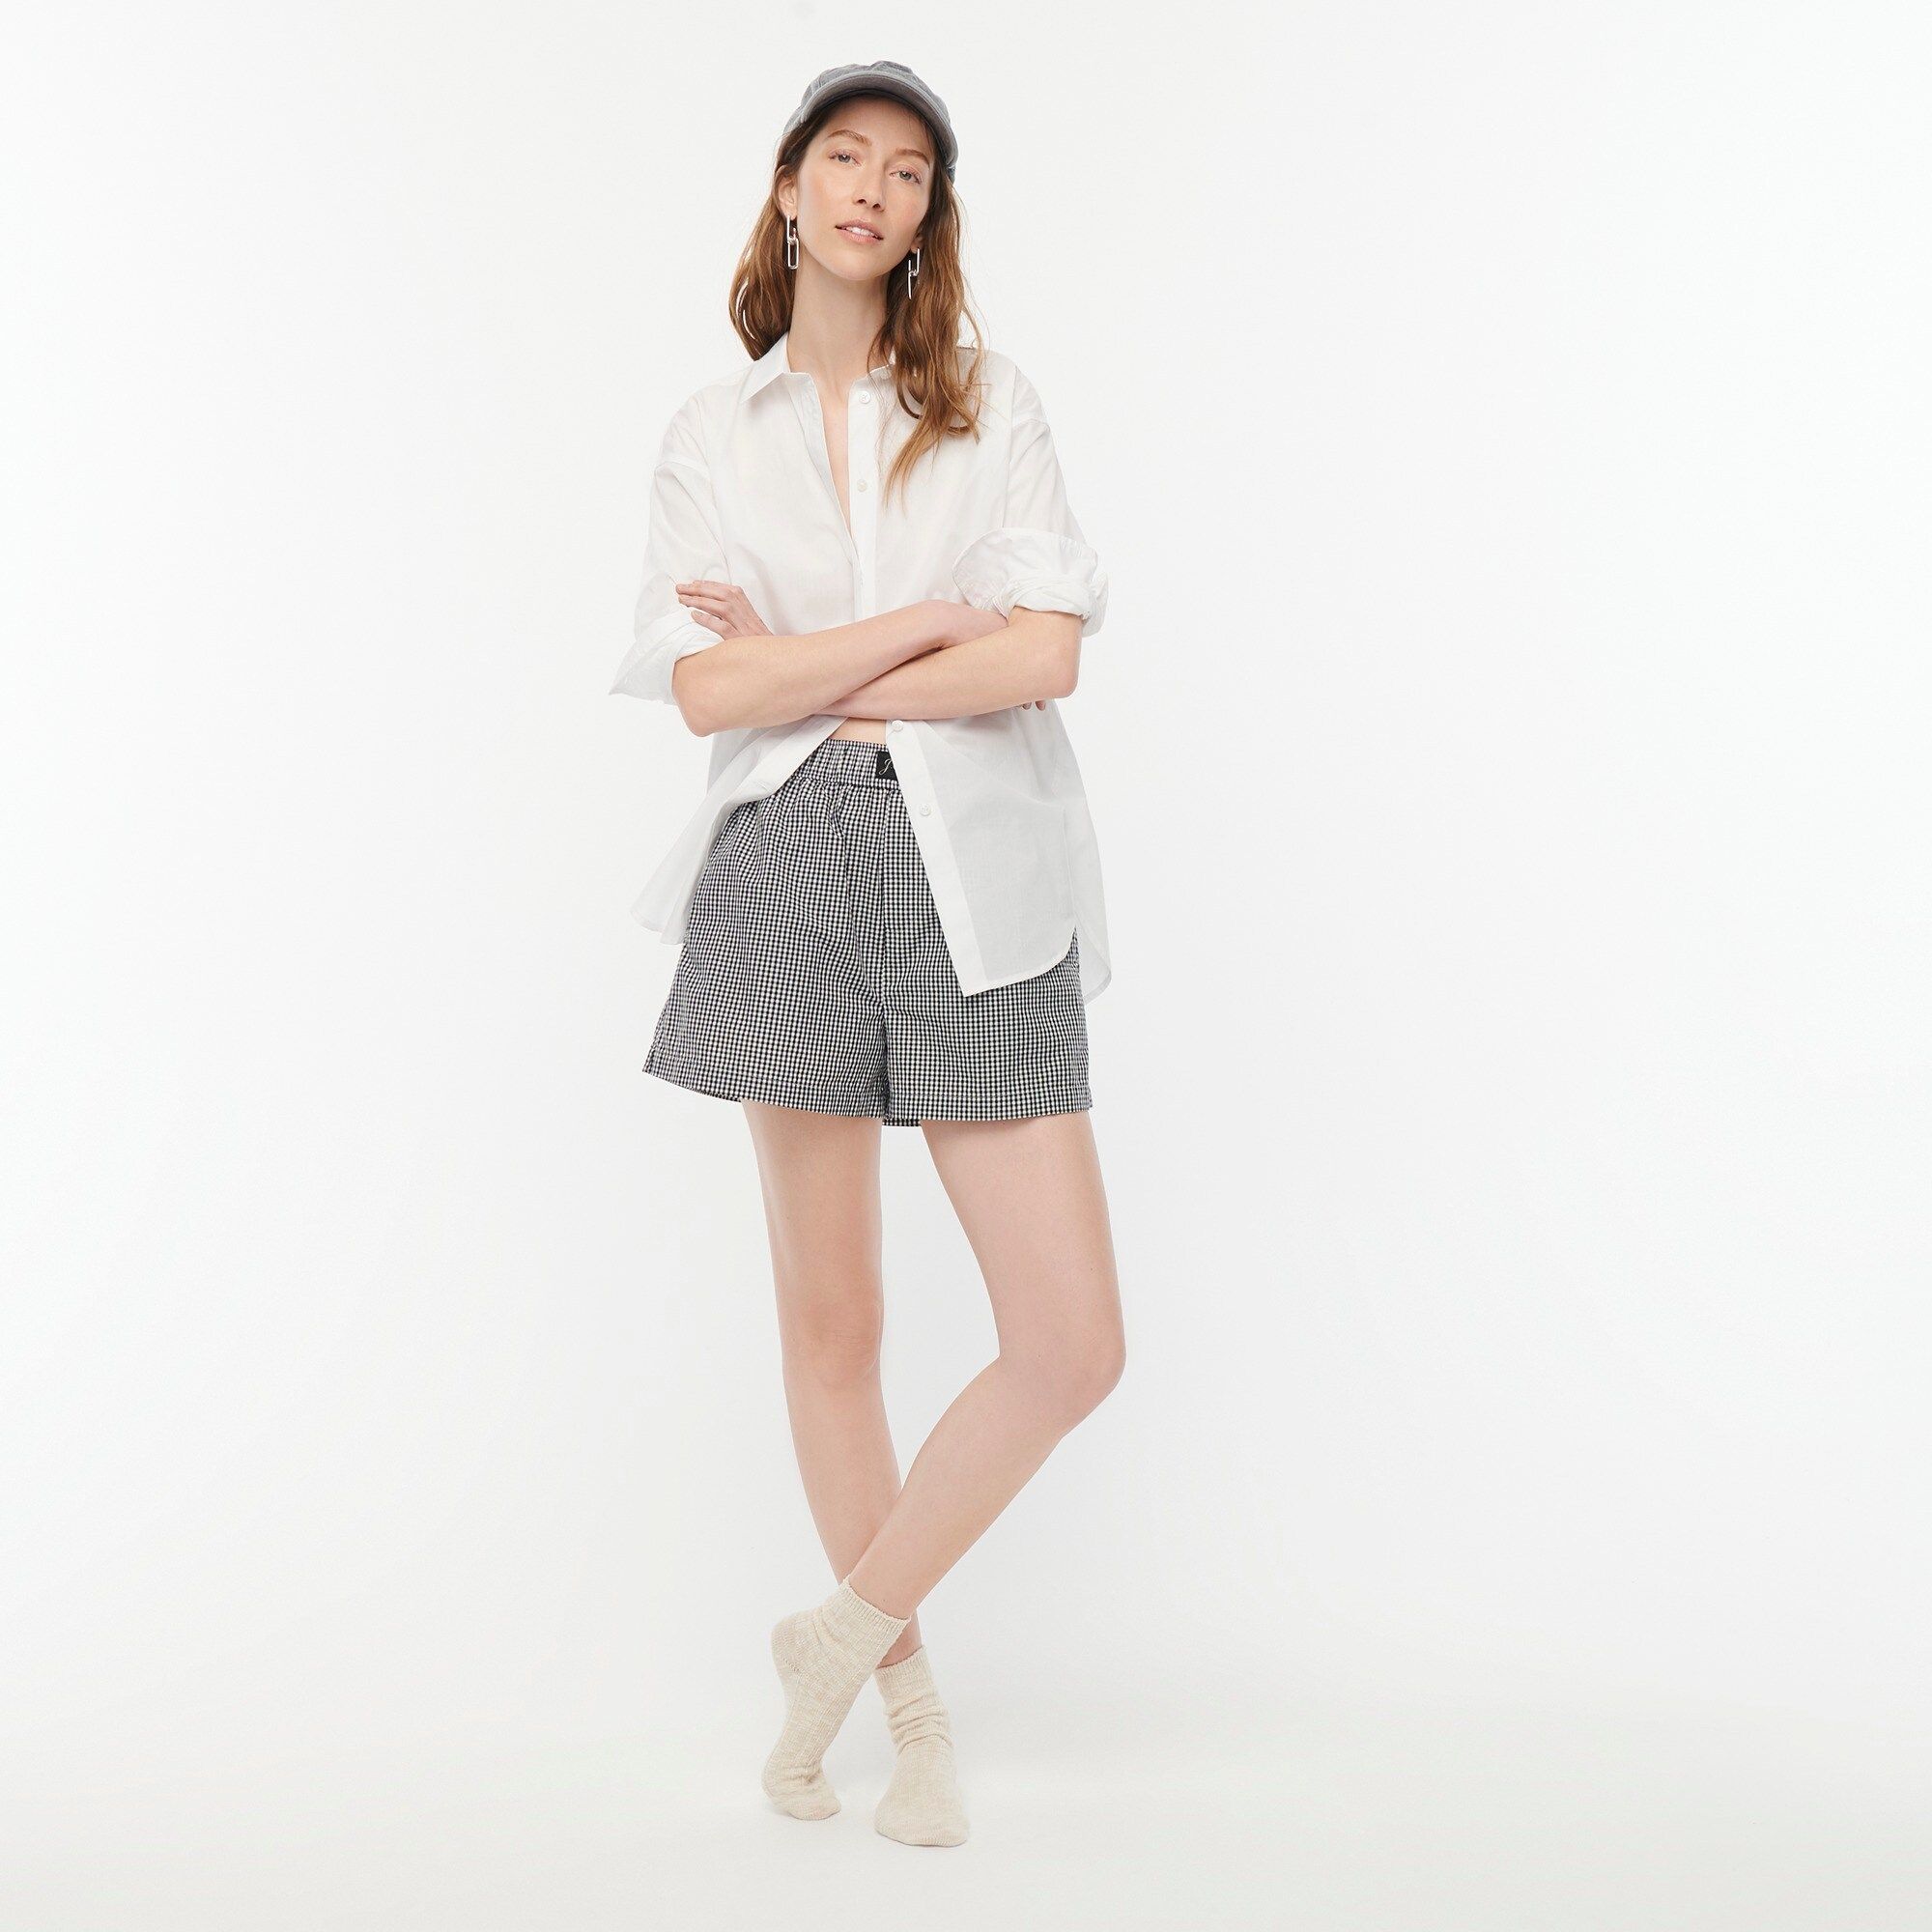 Poplin Boxer shorts are the shorts for summer 2021 - Style & Sway